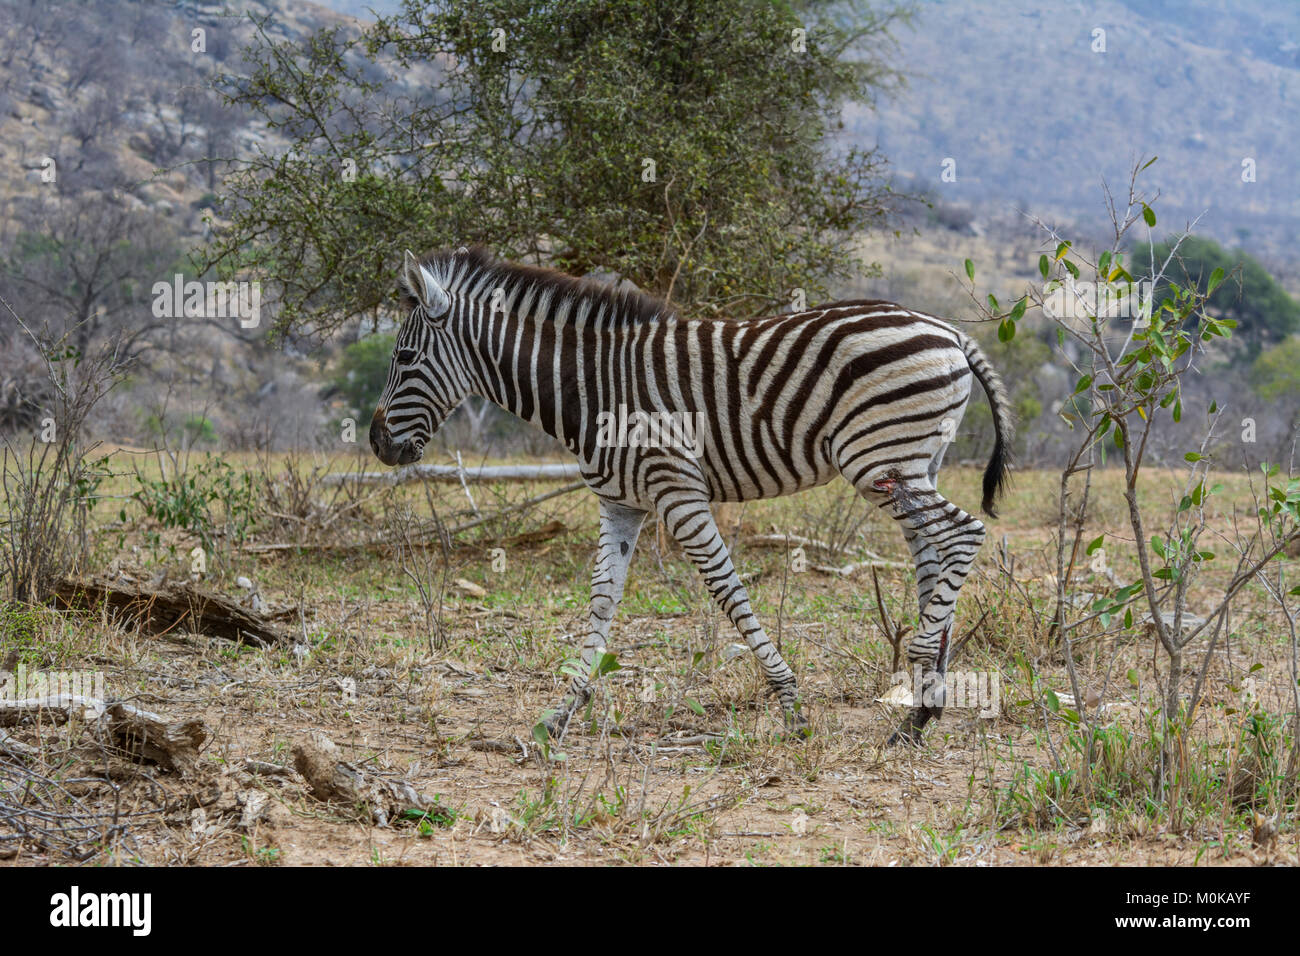 A wounded Burchells zebra (Equus quagga burchellii) walking in Kruger National Park, South Africa Stock Photo